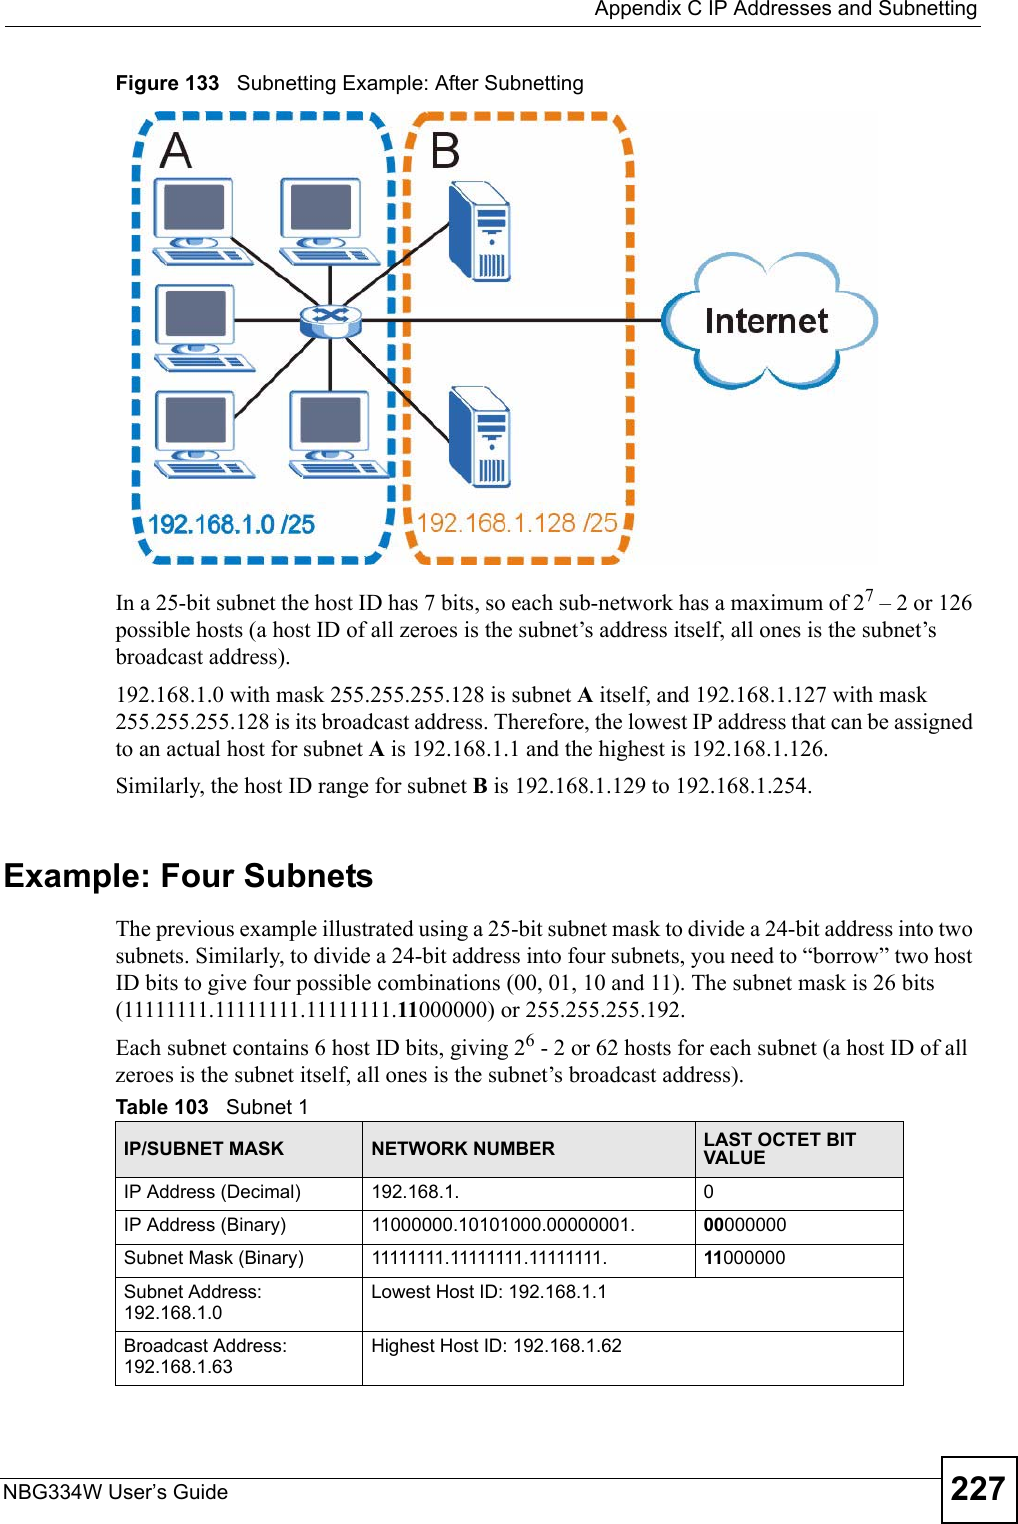  Appendix C IP Addresses and SubnettingNBG334W User’s Guide 227Figure 133   Subnetting Example: After SubnettingIn a 25-bit subnet the host ID has 7 bits, so each sub-network has a maximum of 27 – 2 or 126 possible hosts (a host ID of all zeroes is the subnet’s address itself, all ones is the subnet’s broadcast address).192.168.1.0 with mask 255.255.255.128 is subnet A itself, and 192.168.1.127 with mask 255.255.255.128 is its broadcast address. Therefore, the lowest IP address that can be assigned to an actual host for subnet A is 192.168.1.1 and the highest is 192.168.1.126. Similarly, the host ID range for subnet B is 192.168.1.129 to 192.168.1.254.Example: Four Subnets The previous example illustrated using a 25-bit subnet mask to divide a 24-bit address into two subnets. Similarly, to divide a 24-bit address into four subnets, you need to “borrow” two host ID bits to give four possible combinations (00, 01, 10 and 11). The subnet mask is 26 bits (11111111.11111111.11111111.11000000) or 255.255.255.192. Each subnet contains 6 host ID bits, giving 26 - 2 or 62 hosts for each subnet (a host ID of all zeroes is the subnet itself, all ones is the subnet’s broadcast address). Table 103   Subnet 1IP/SUBNET MASK NETWORK NUMBER LAST OCTET BIT VALUEIP Address (Decimal) 192.168.1. 0IP Address (Binary) 11000000.10101000.00000001. 00000000Subnet Mask (Binary) 11111111.11111111.11111111. 11000000Subnet Address: 192.168.1.0Lowest Host ID: 192.168.1.1Broadcast Address: 192.168.1.63Highest Host ID: 192.168.1.62